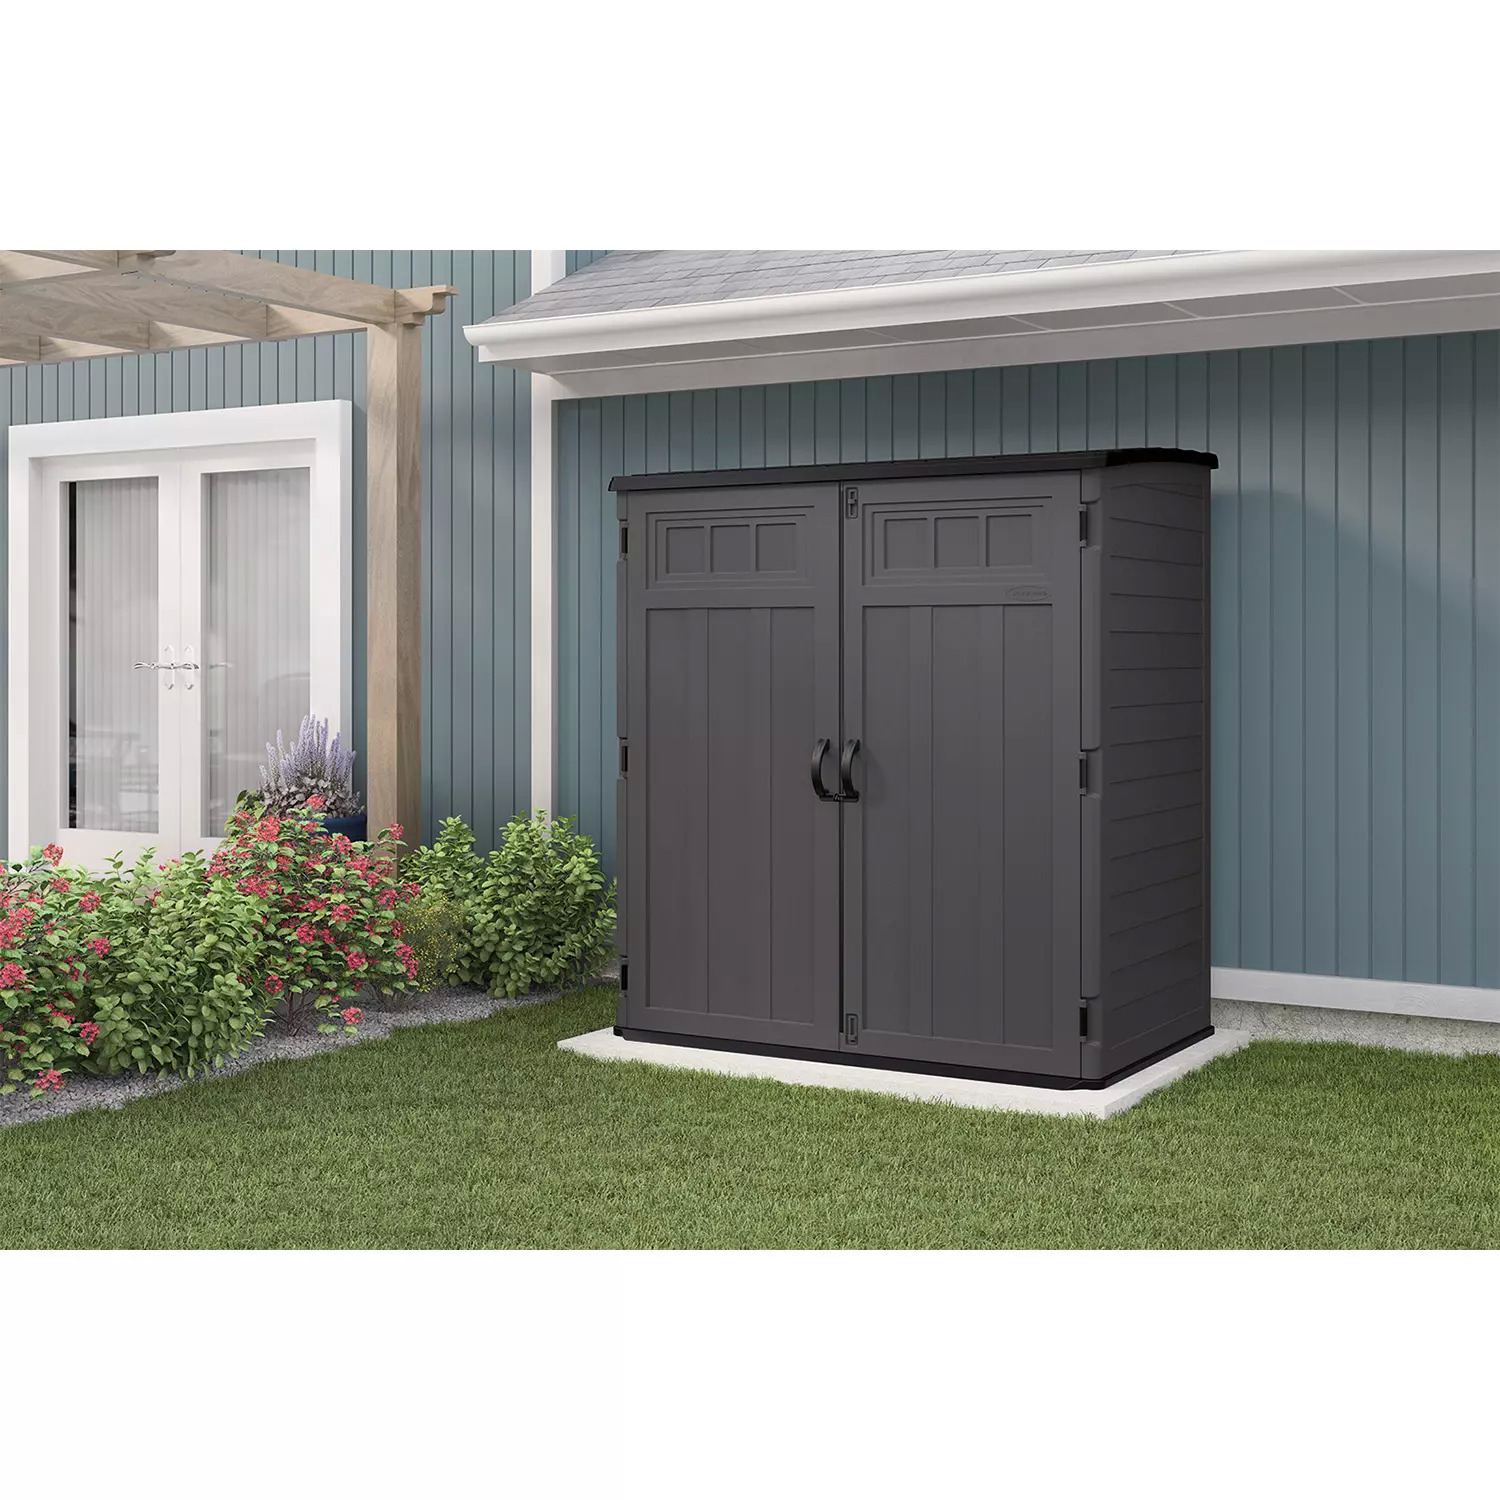 Suncast Extra Large Vertical Outdoor Storage Shed with in store pickup at Sam's Club - $399 - YMMV